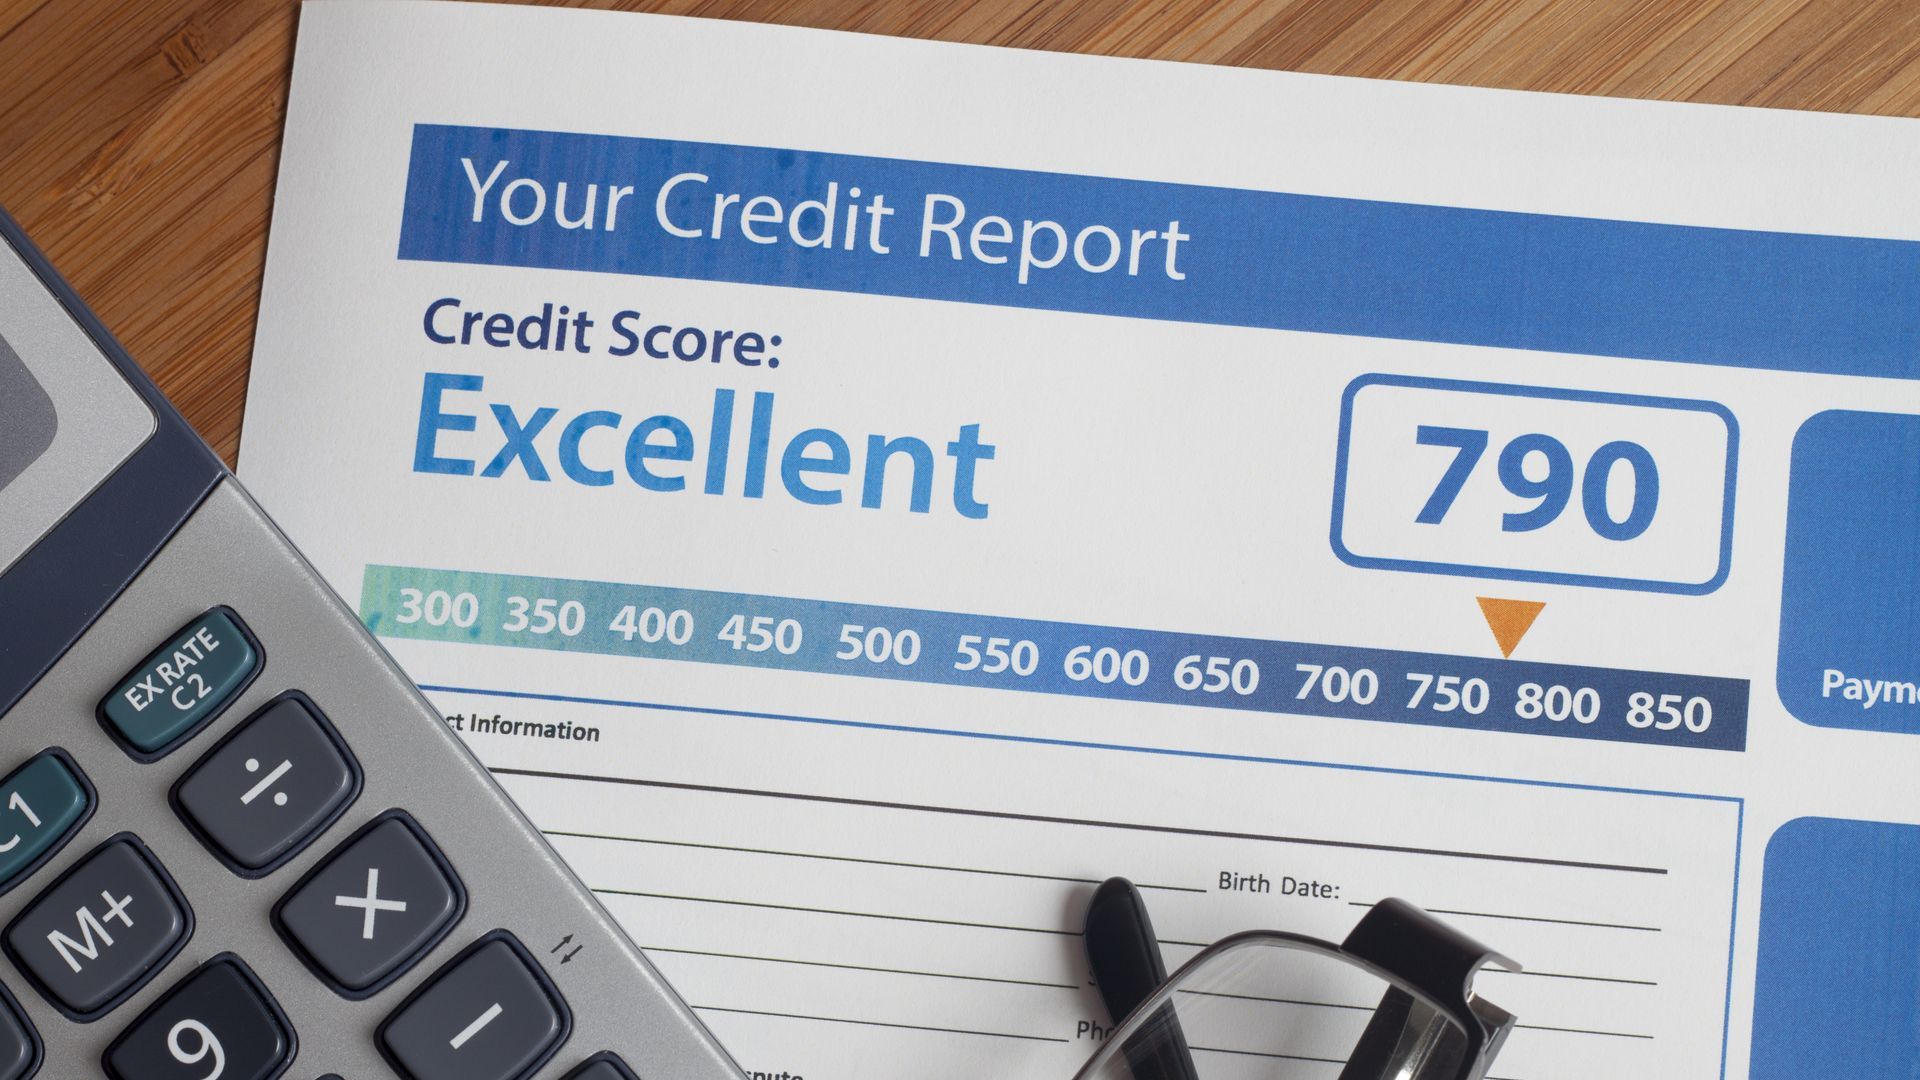 a printed document of a high credit score